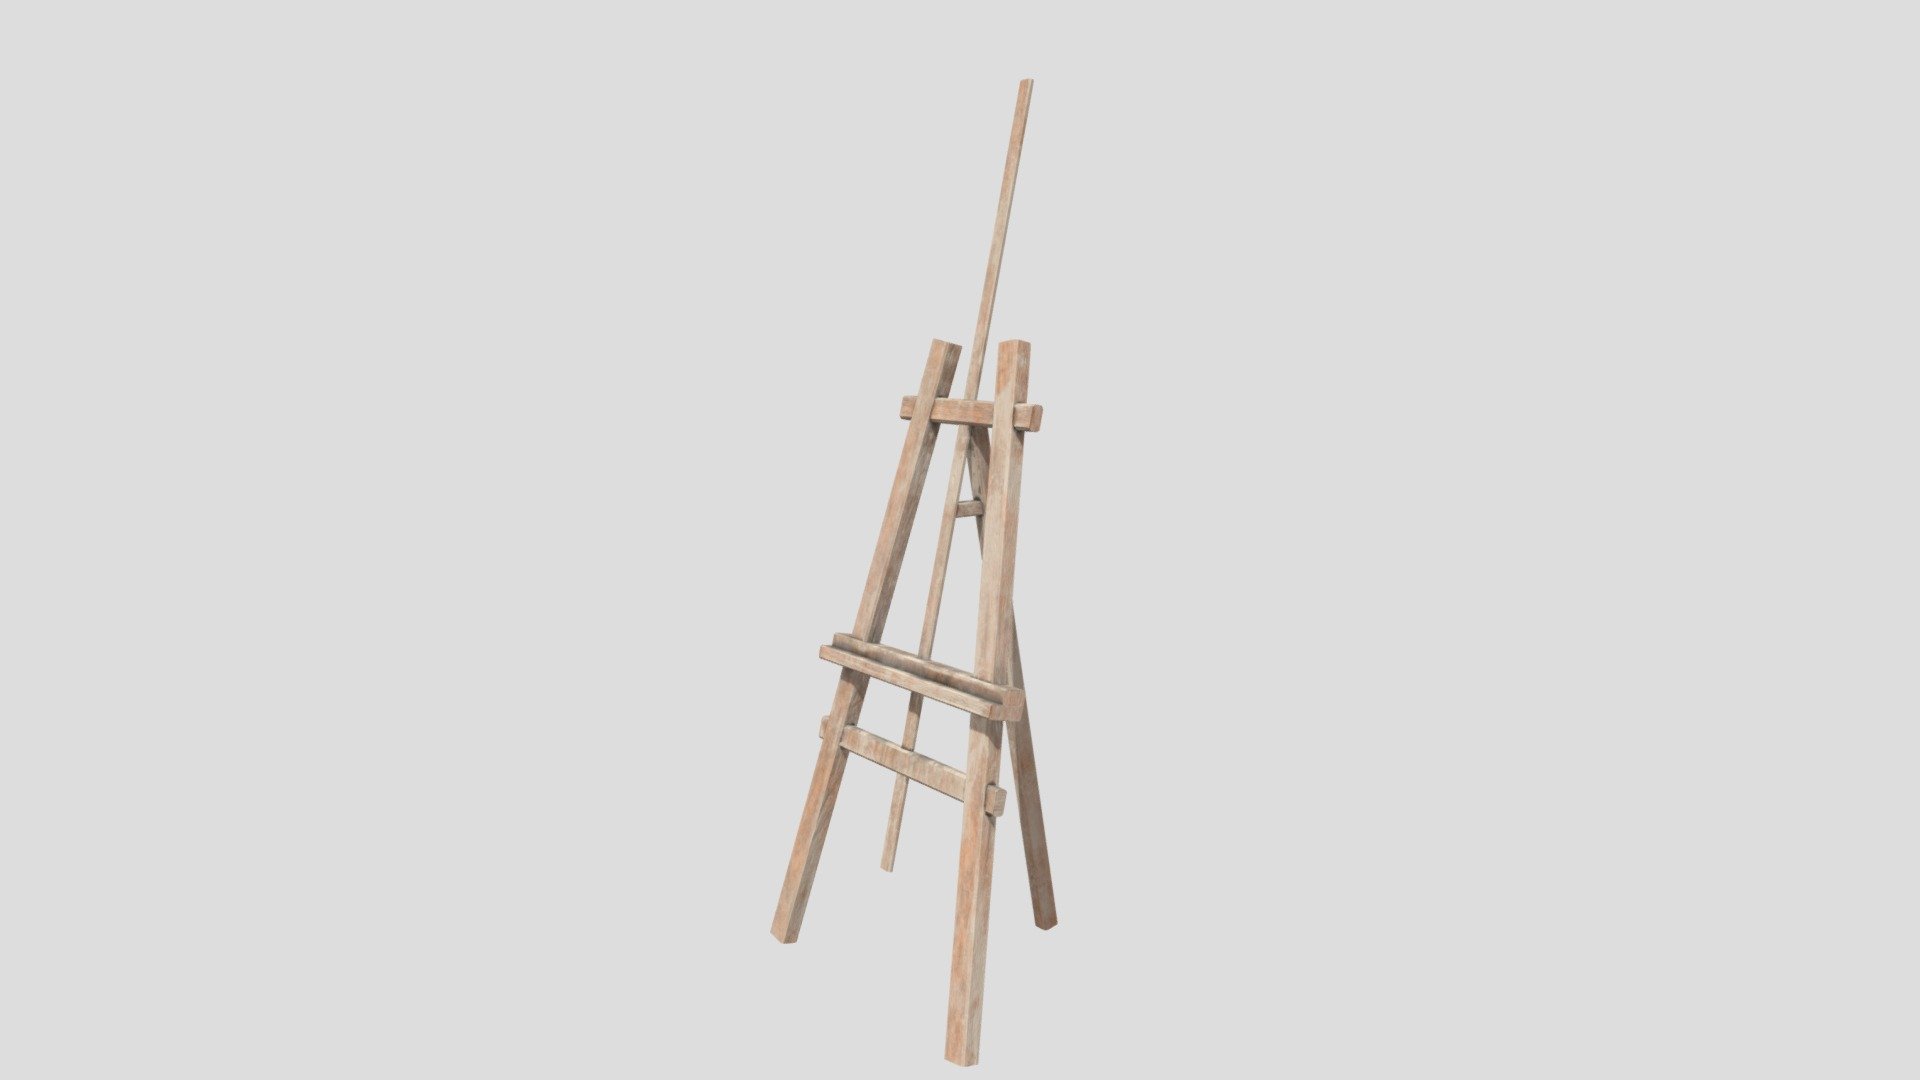 Wooden easel stand model crated as an asset for VR game 3d model